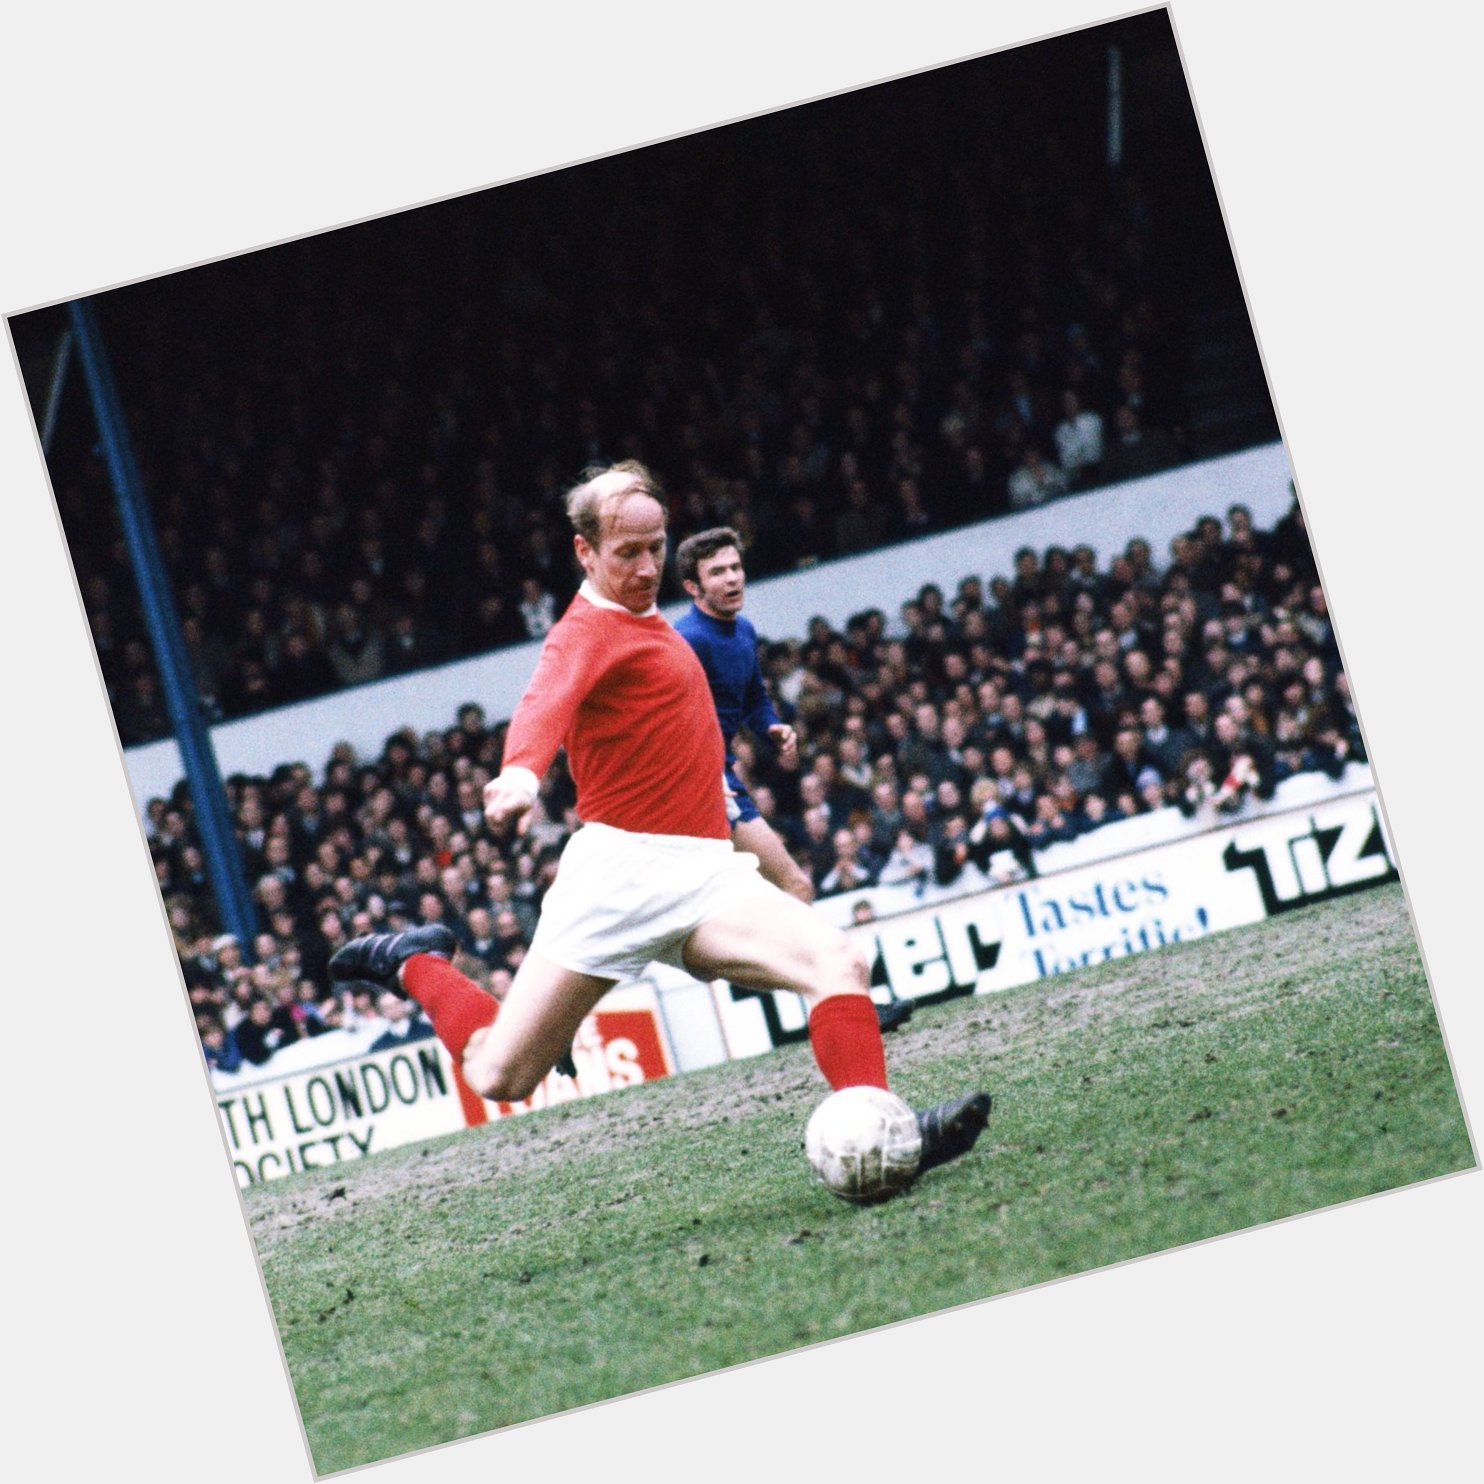 A true gentlemen on and off the field armed with a thunderbolt of a shot.

Happy Birthday Sir Bobby Charlton 